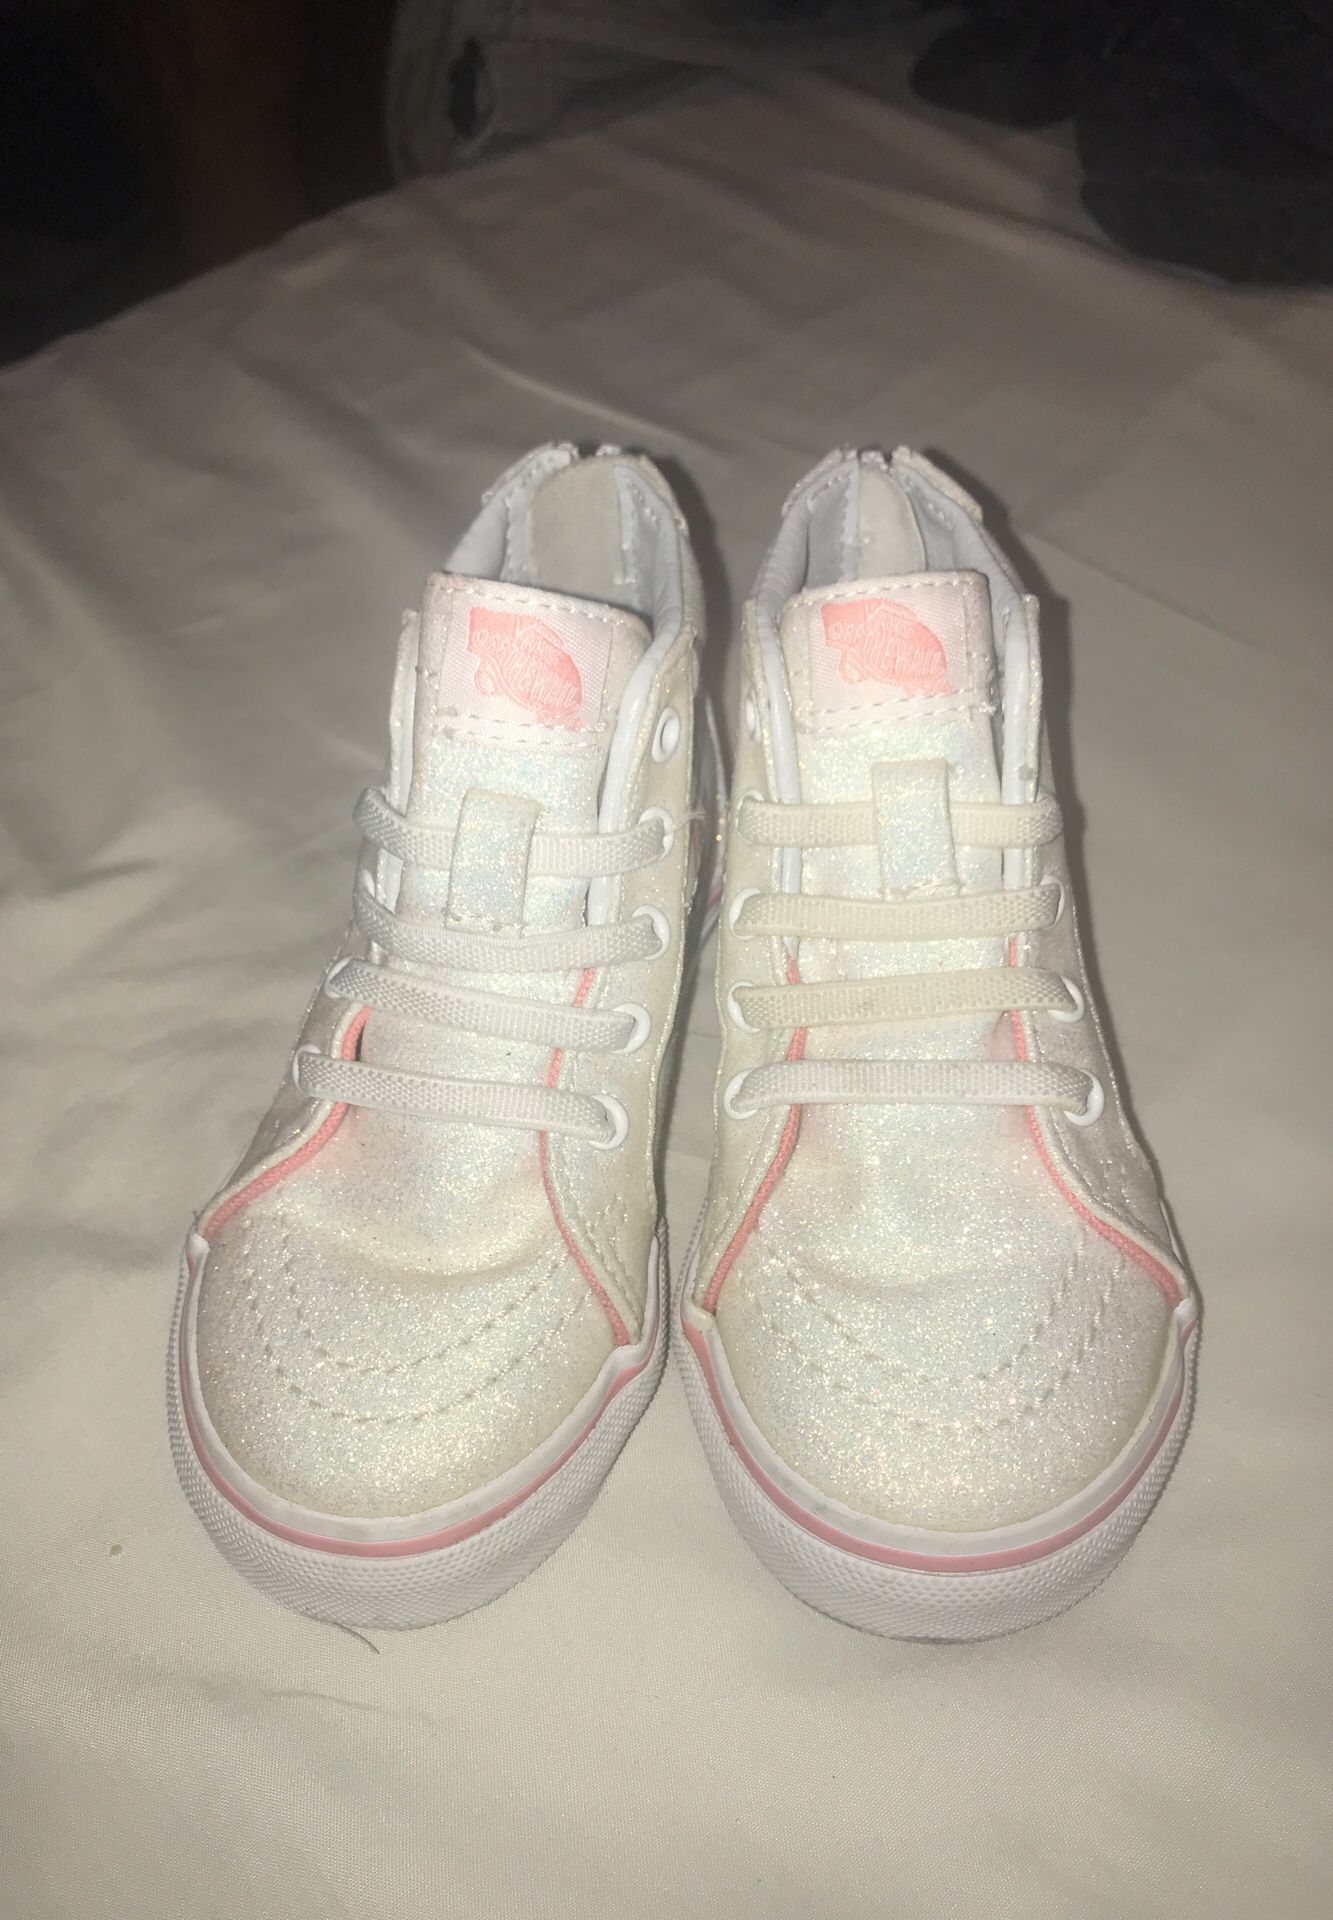 Unicorn vans size 7 for toddlers.